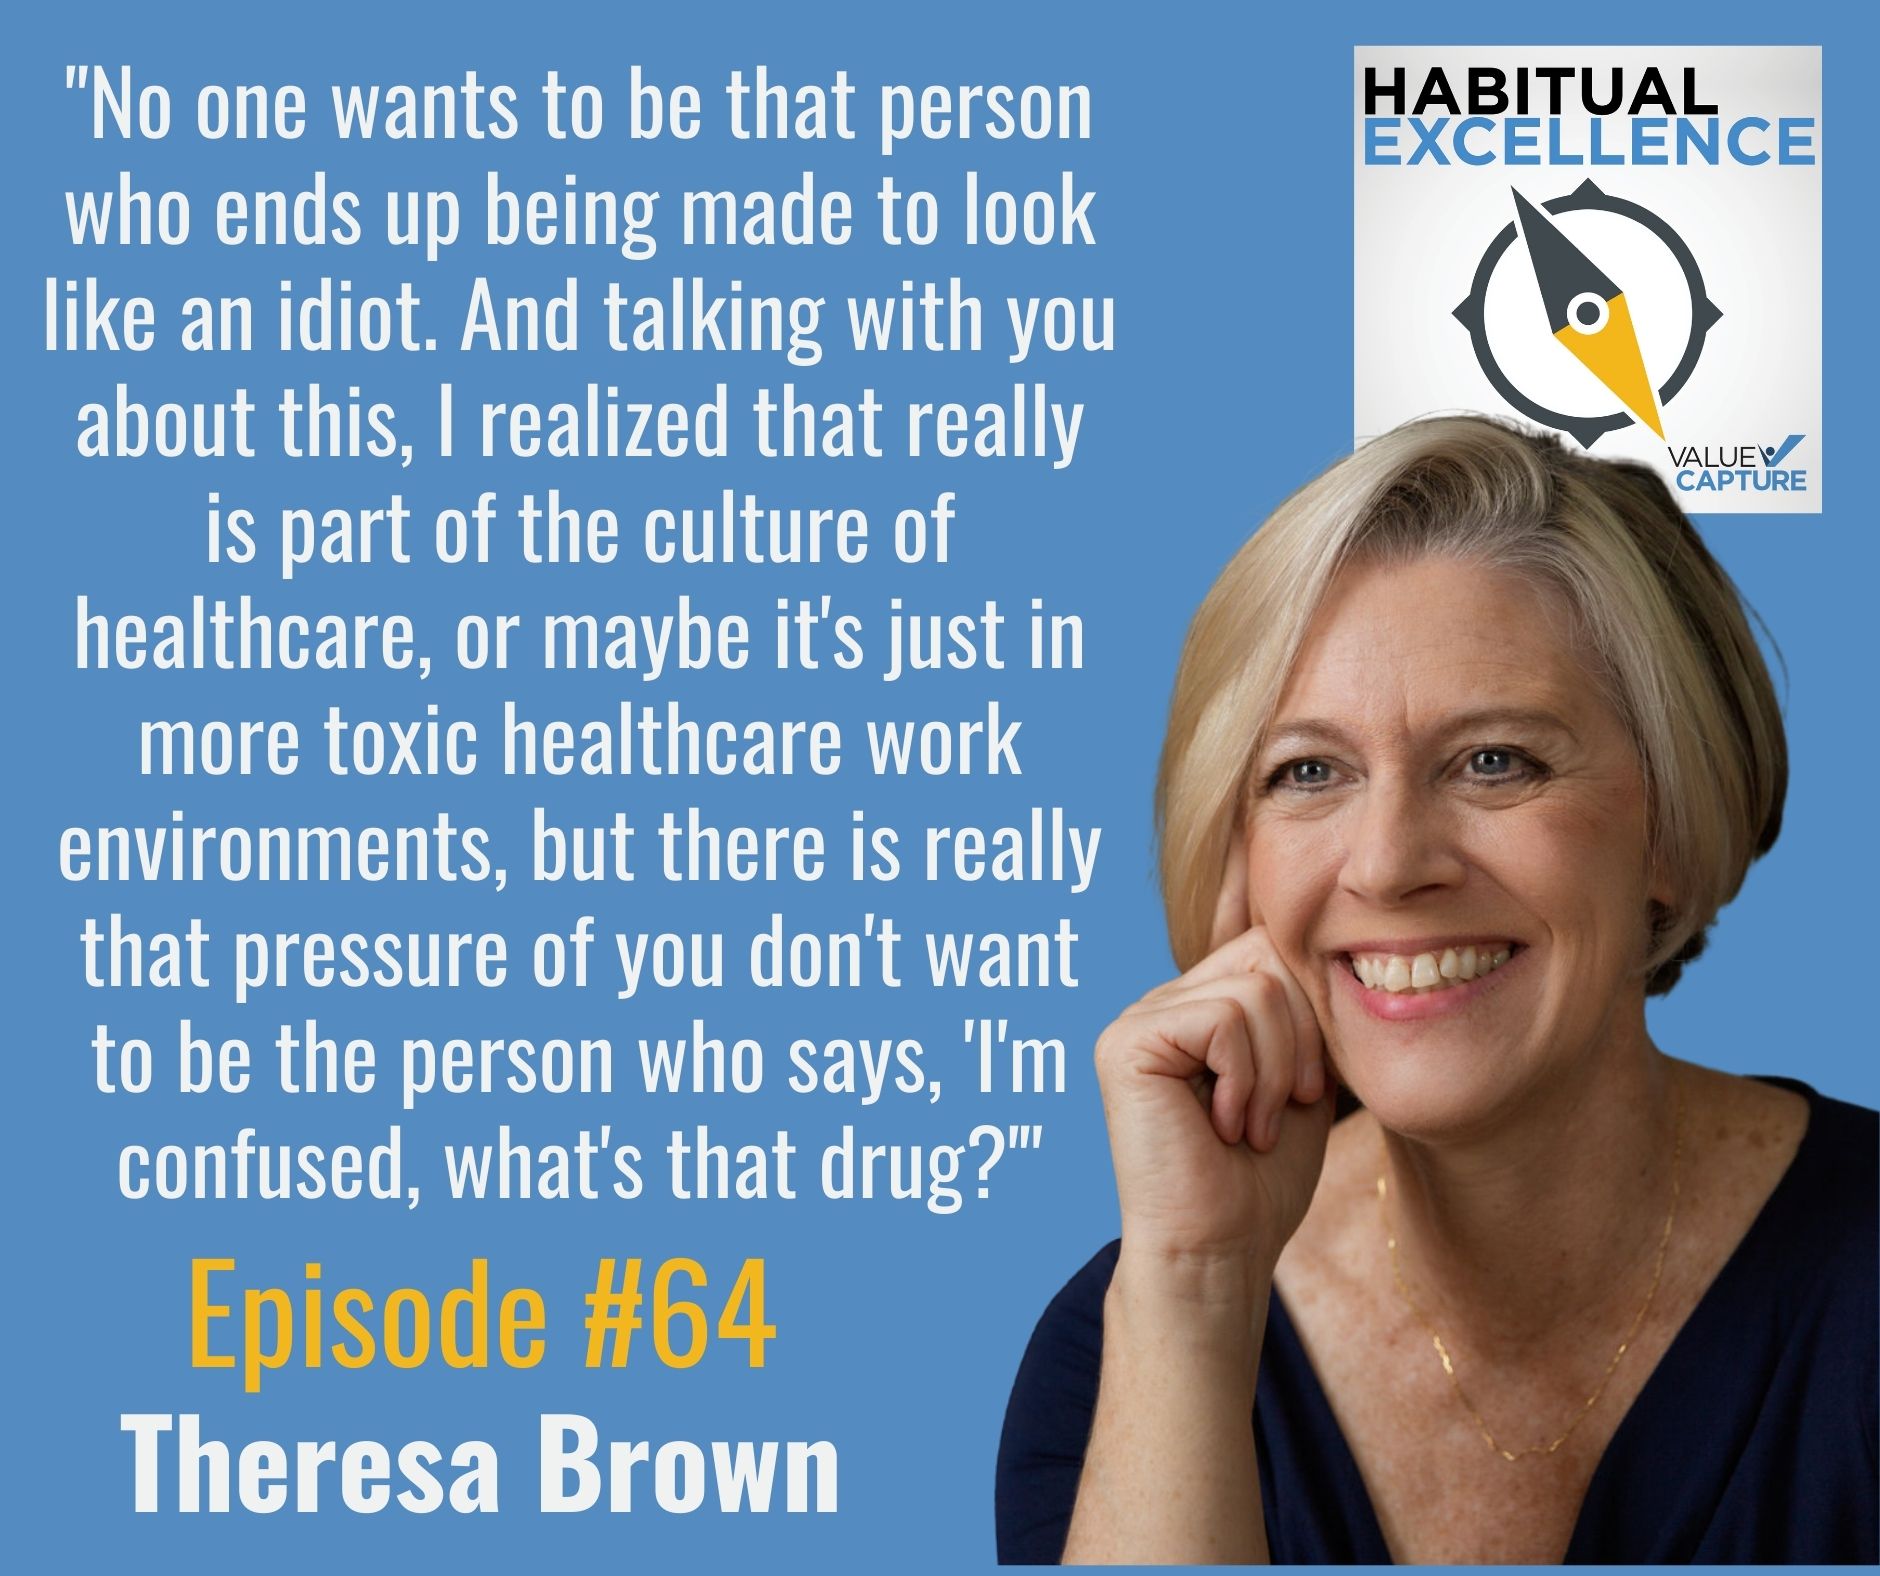 "No one wants to be that person who ends up being made to look like an idiot. And talking with you about this, I realized that really is part of the culture of healthcare, or maybe it's just in more toxic healthcare work environments, but there is really that pressure of you don't want to be the person who says, 'I'm confused, what's that drug?'"